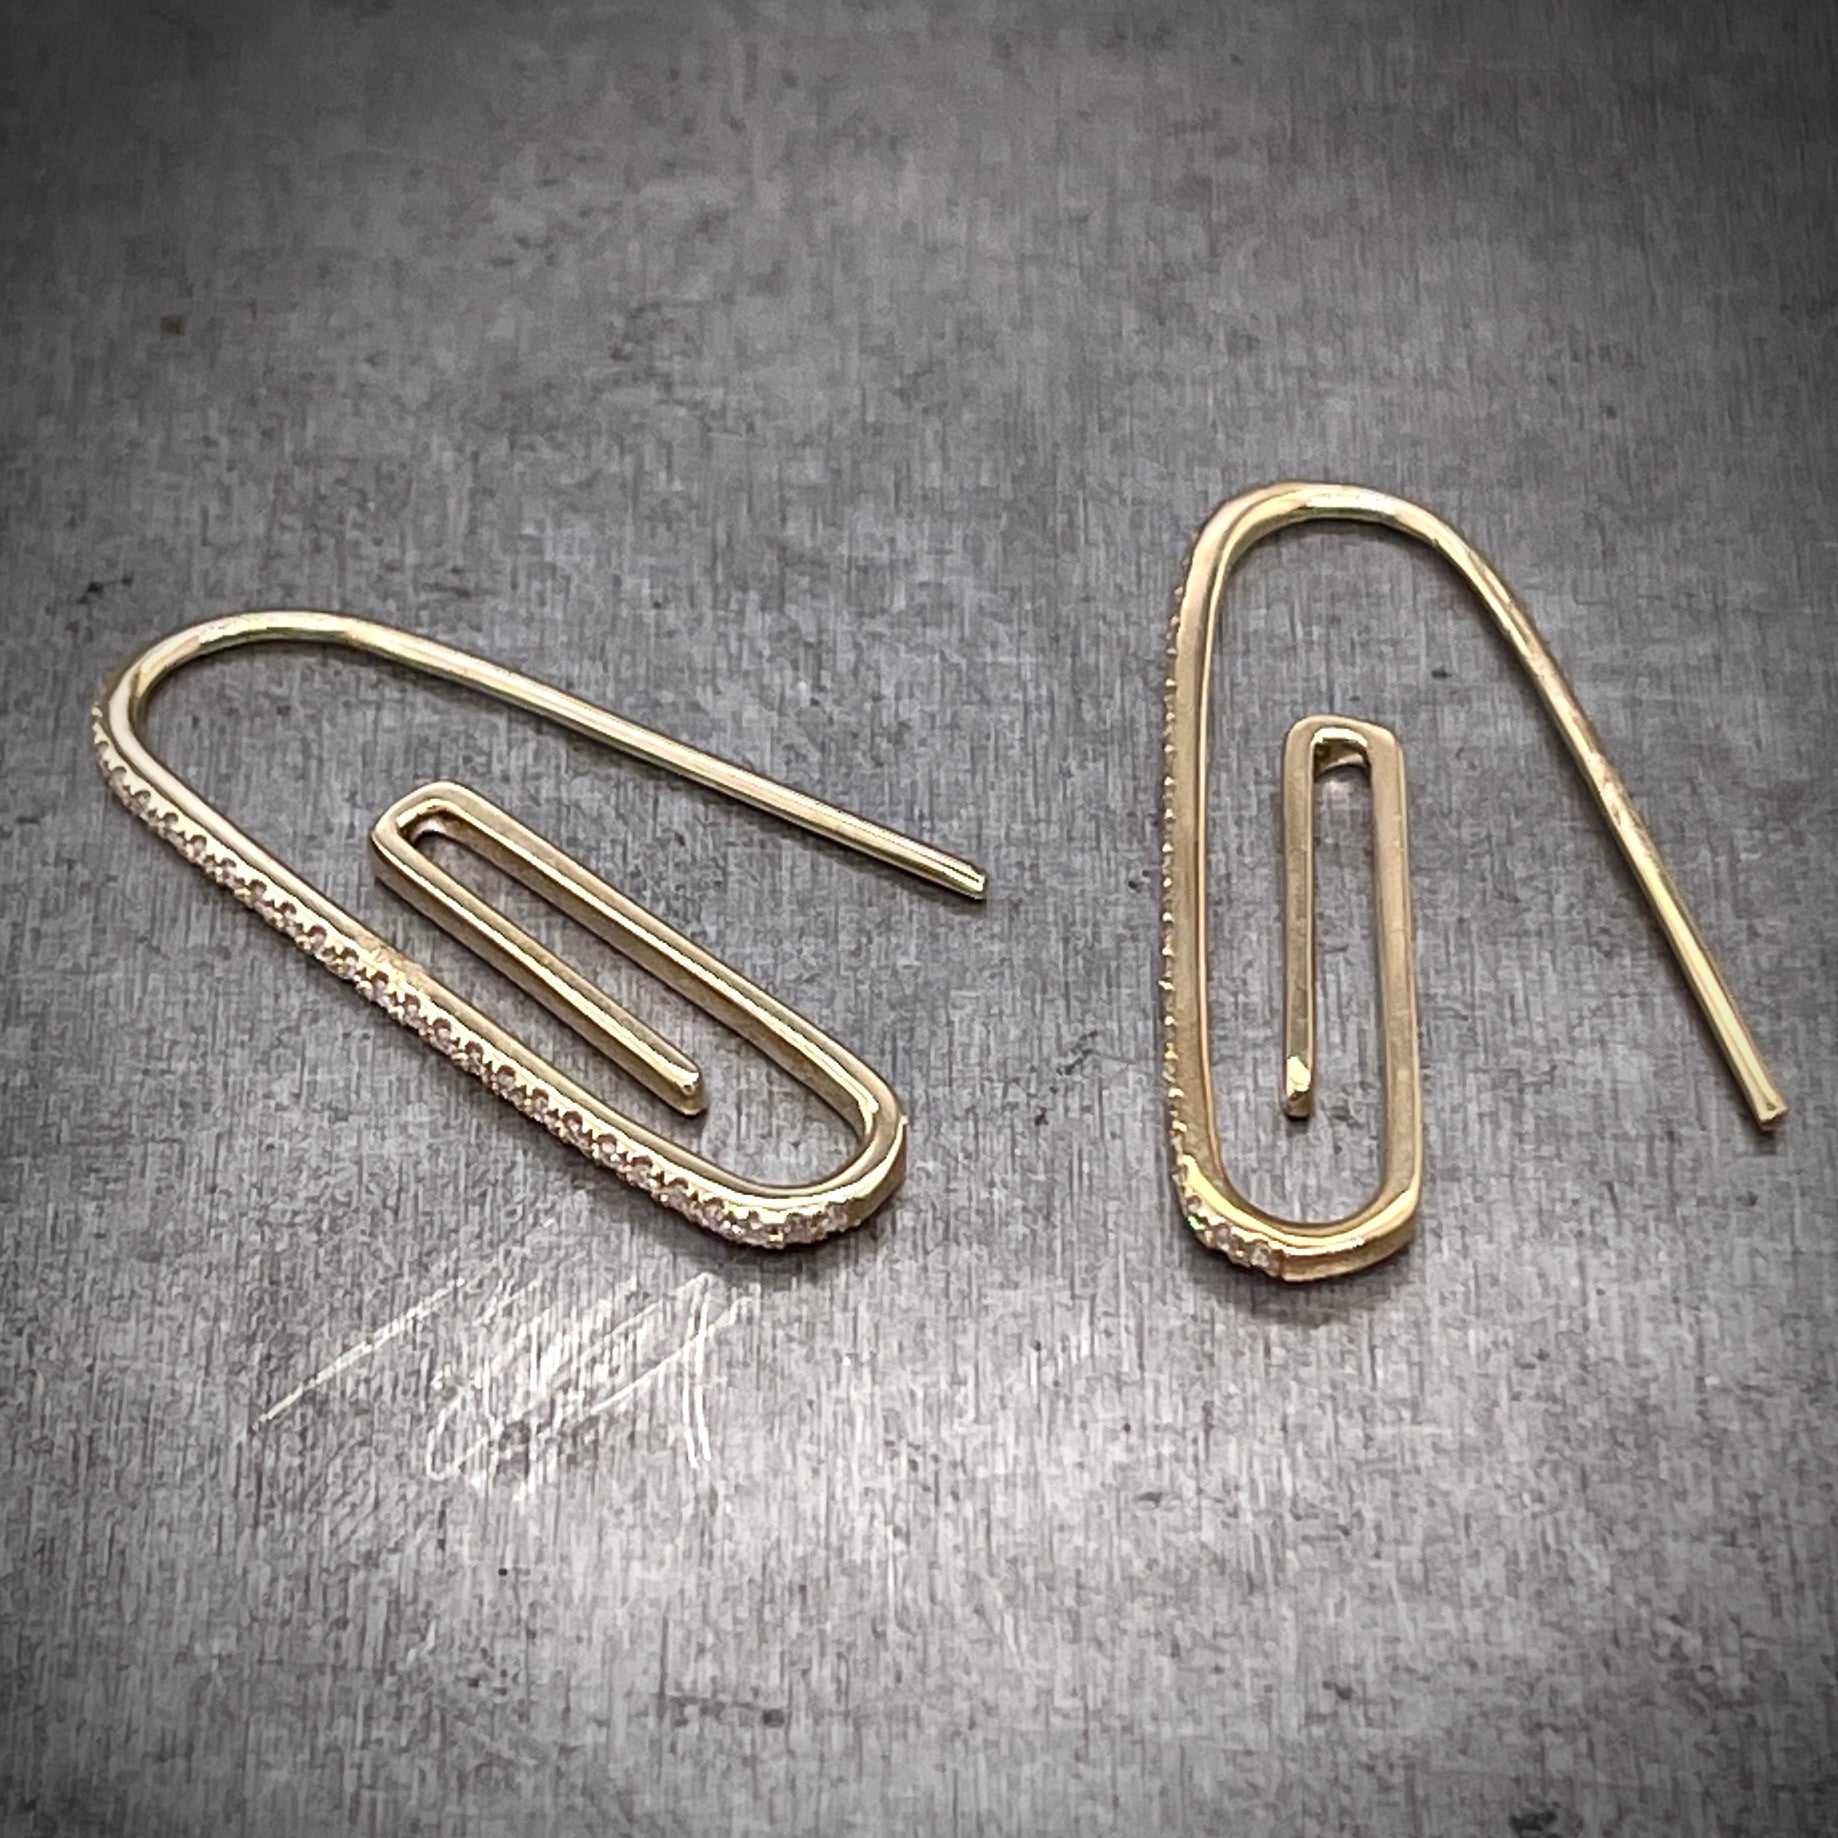 Full view of both paperclip earrings laying down. Here you can see the diamonds only travel on the front of the most forward layer of the paperclip.